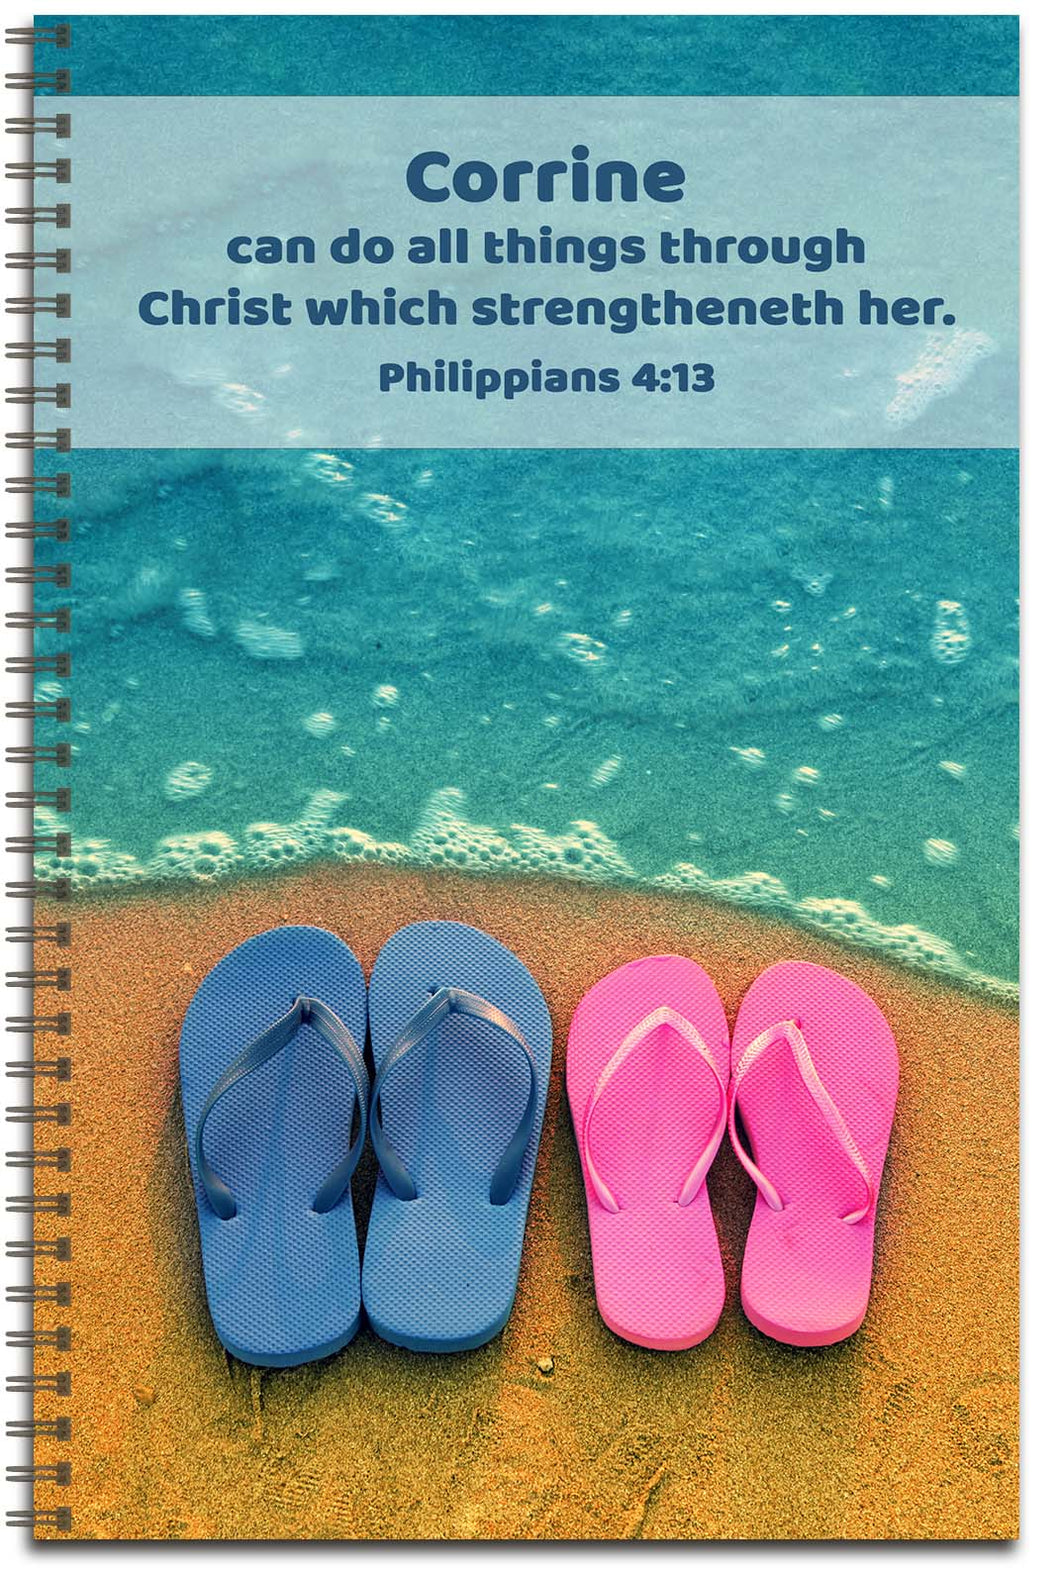 Sandals - Personalized Journal